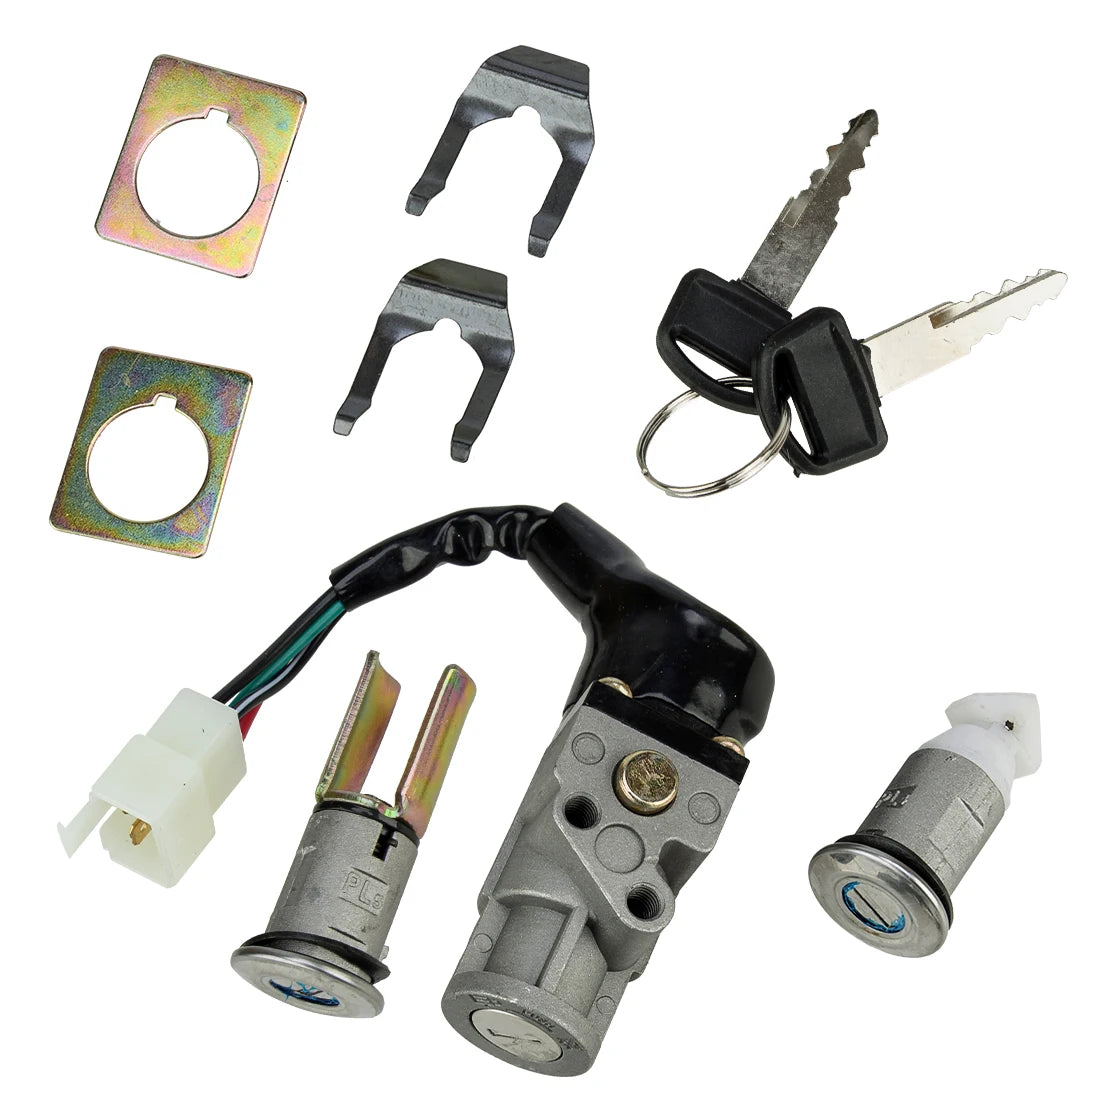 35010-GV4-901 Electric Ignition Switch Lock Seat Lock Key Kit Fit For Honda CH80 Elite 1985-2001 2002 2003 2004 2005 2006 2007